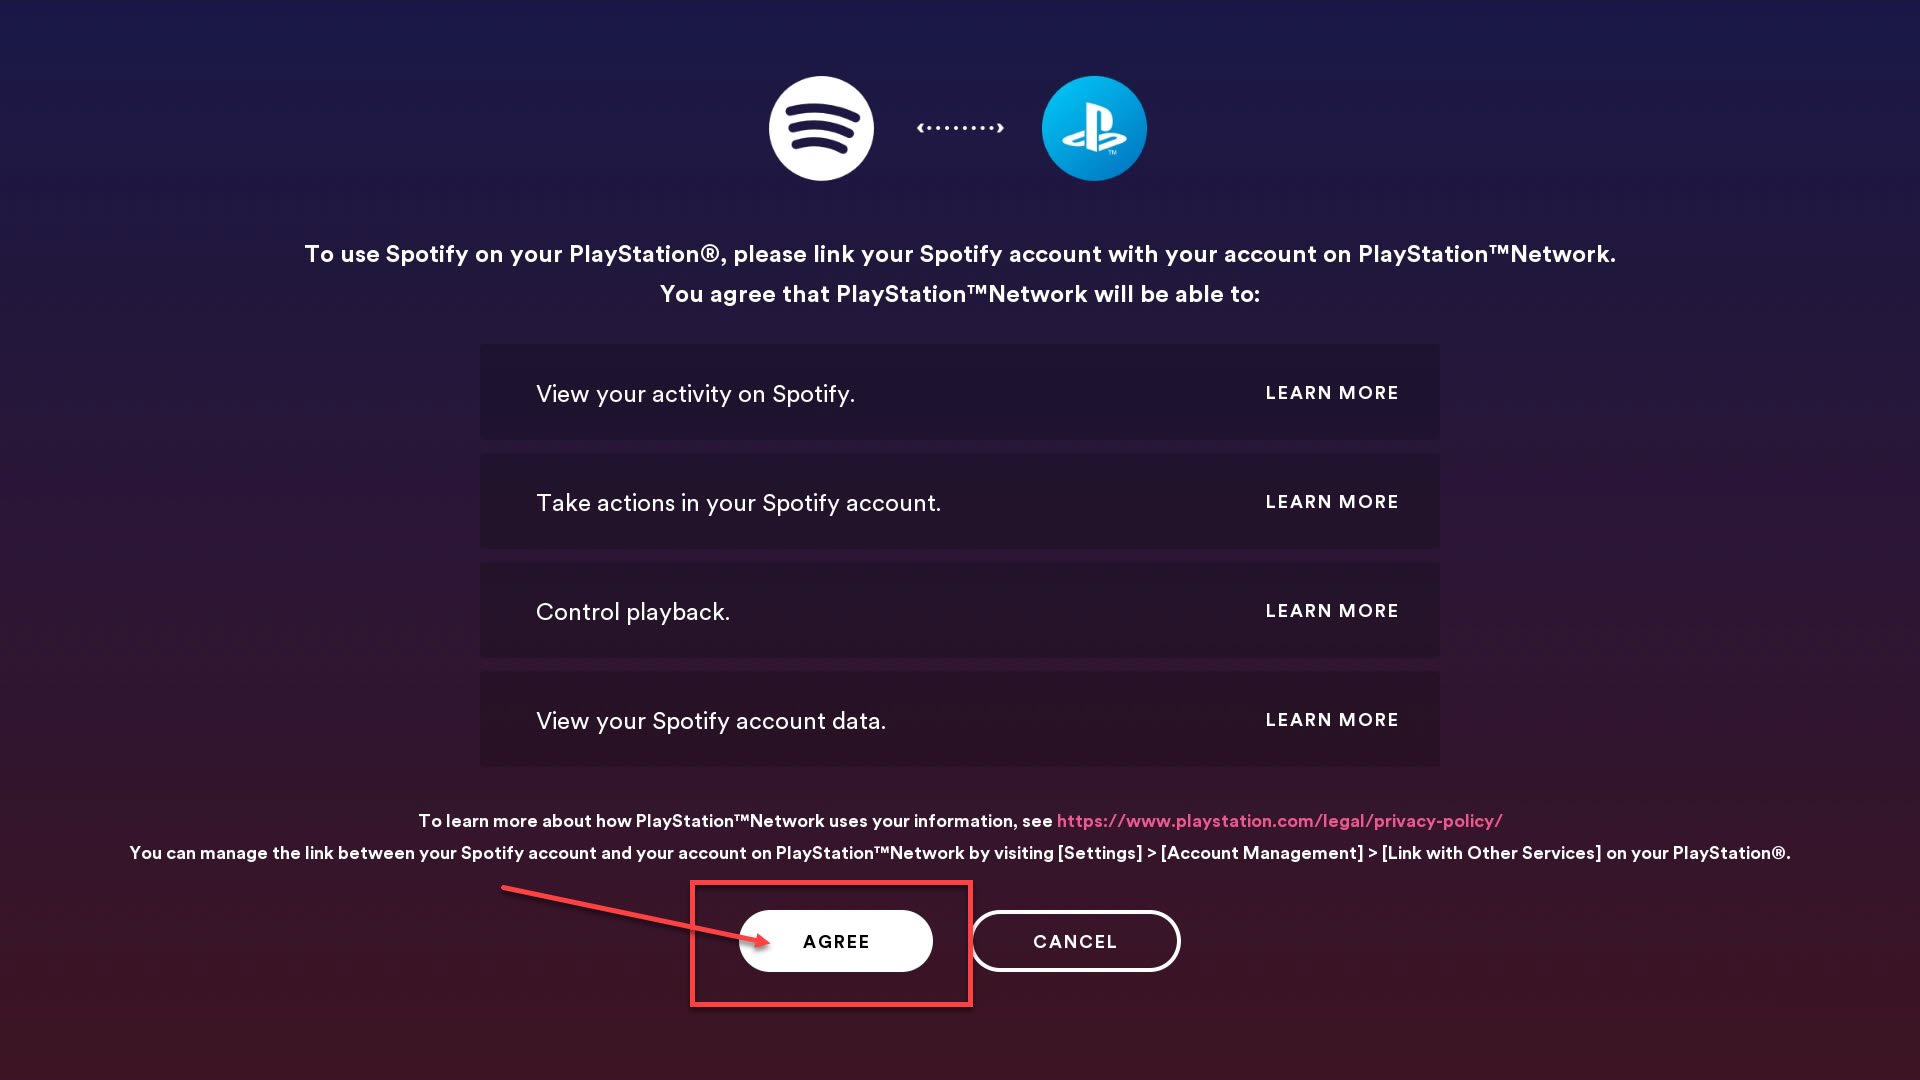 How to connect and unlink Spotify from PS4?